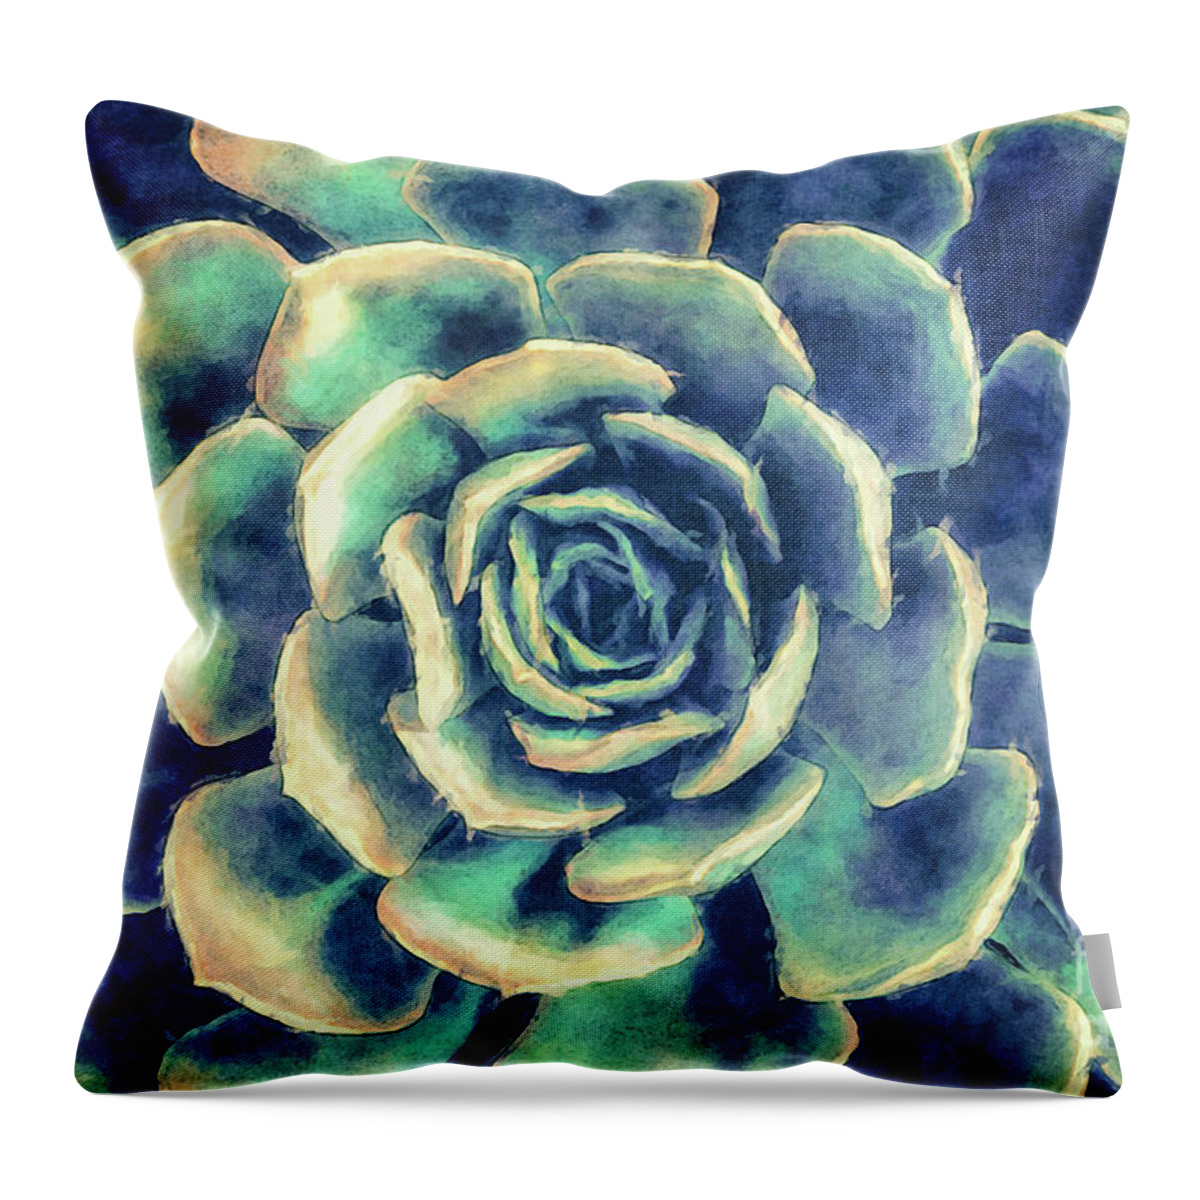 Succulent Throw Pillow featuring the digital art Succulent Plant by Phil Perkins